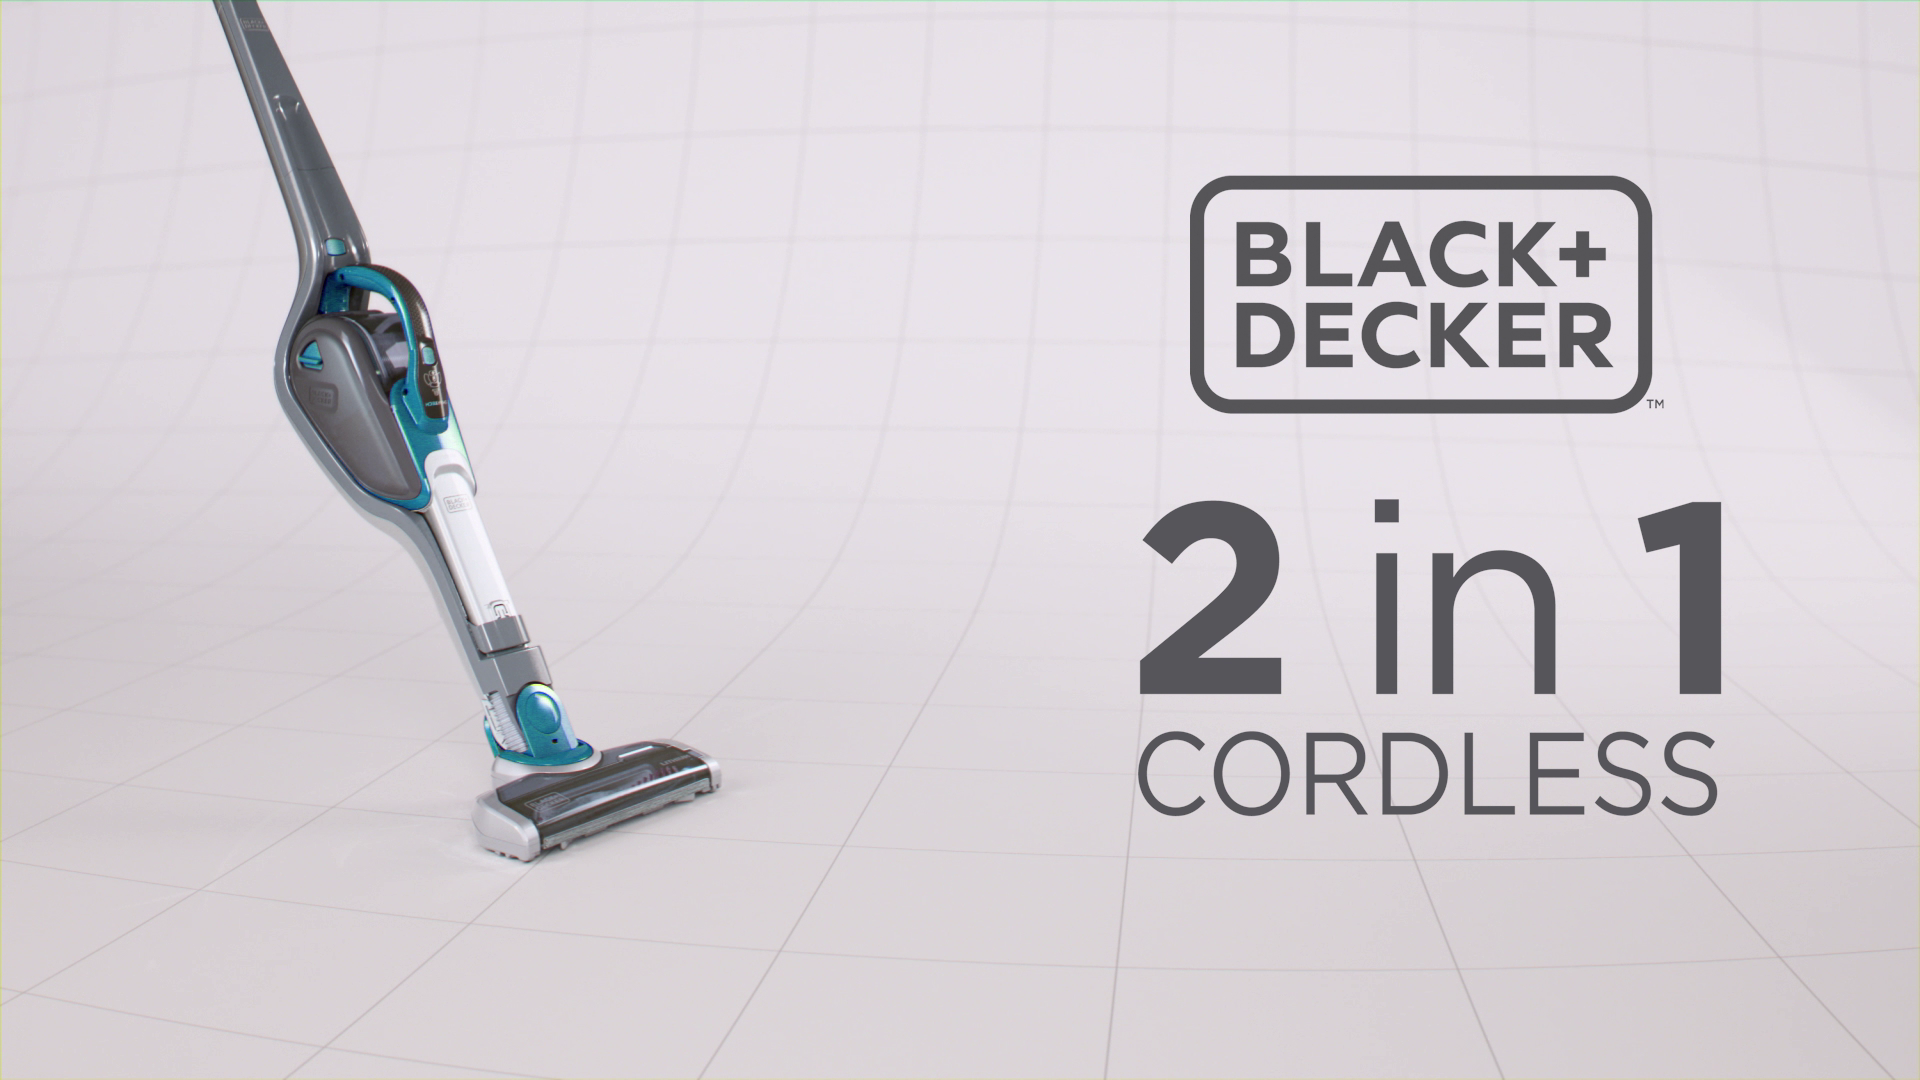 Black+Decker - Commercial for 2 in 1 Cordless vacuum cleaner